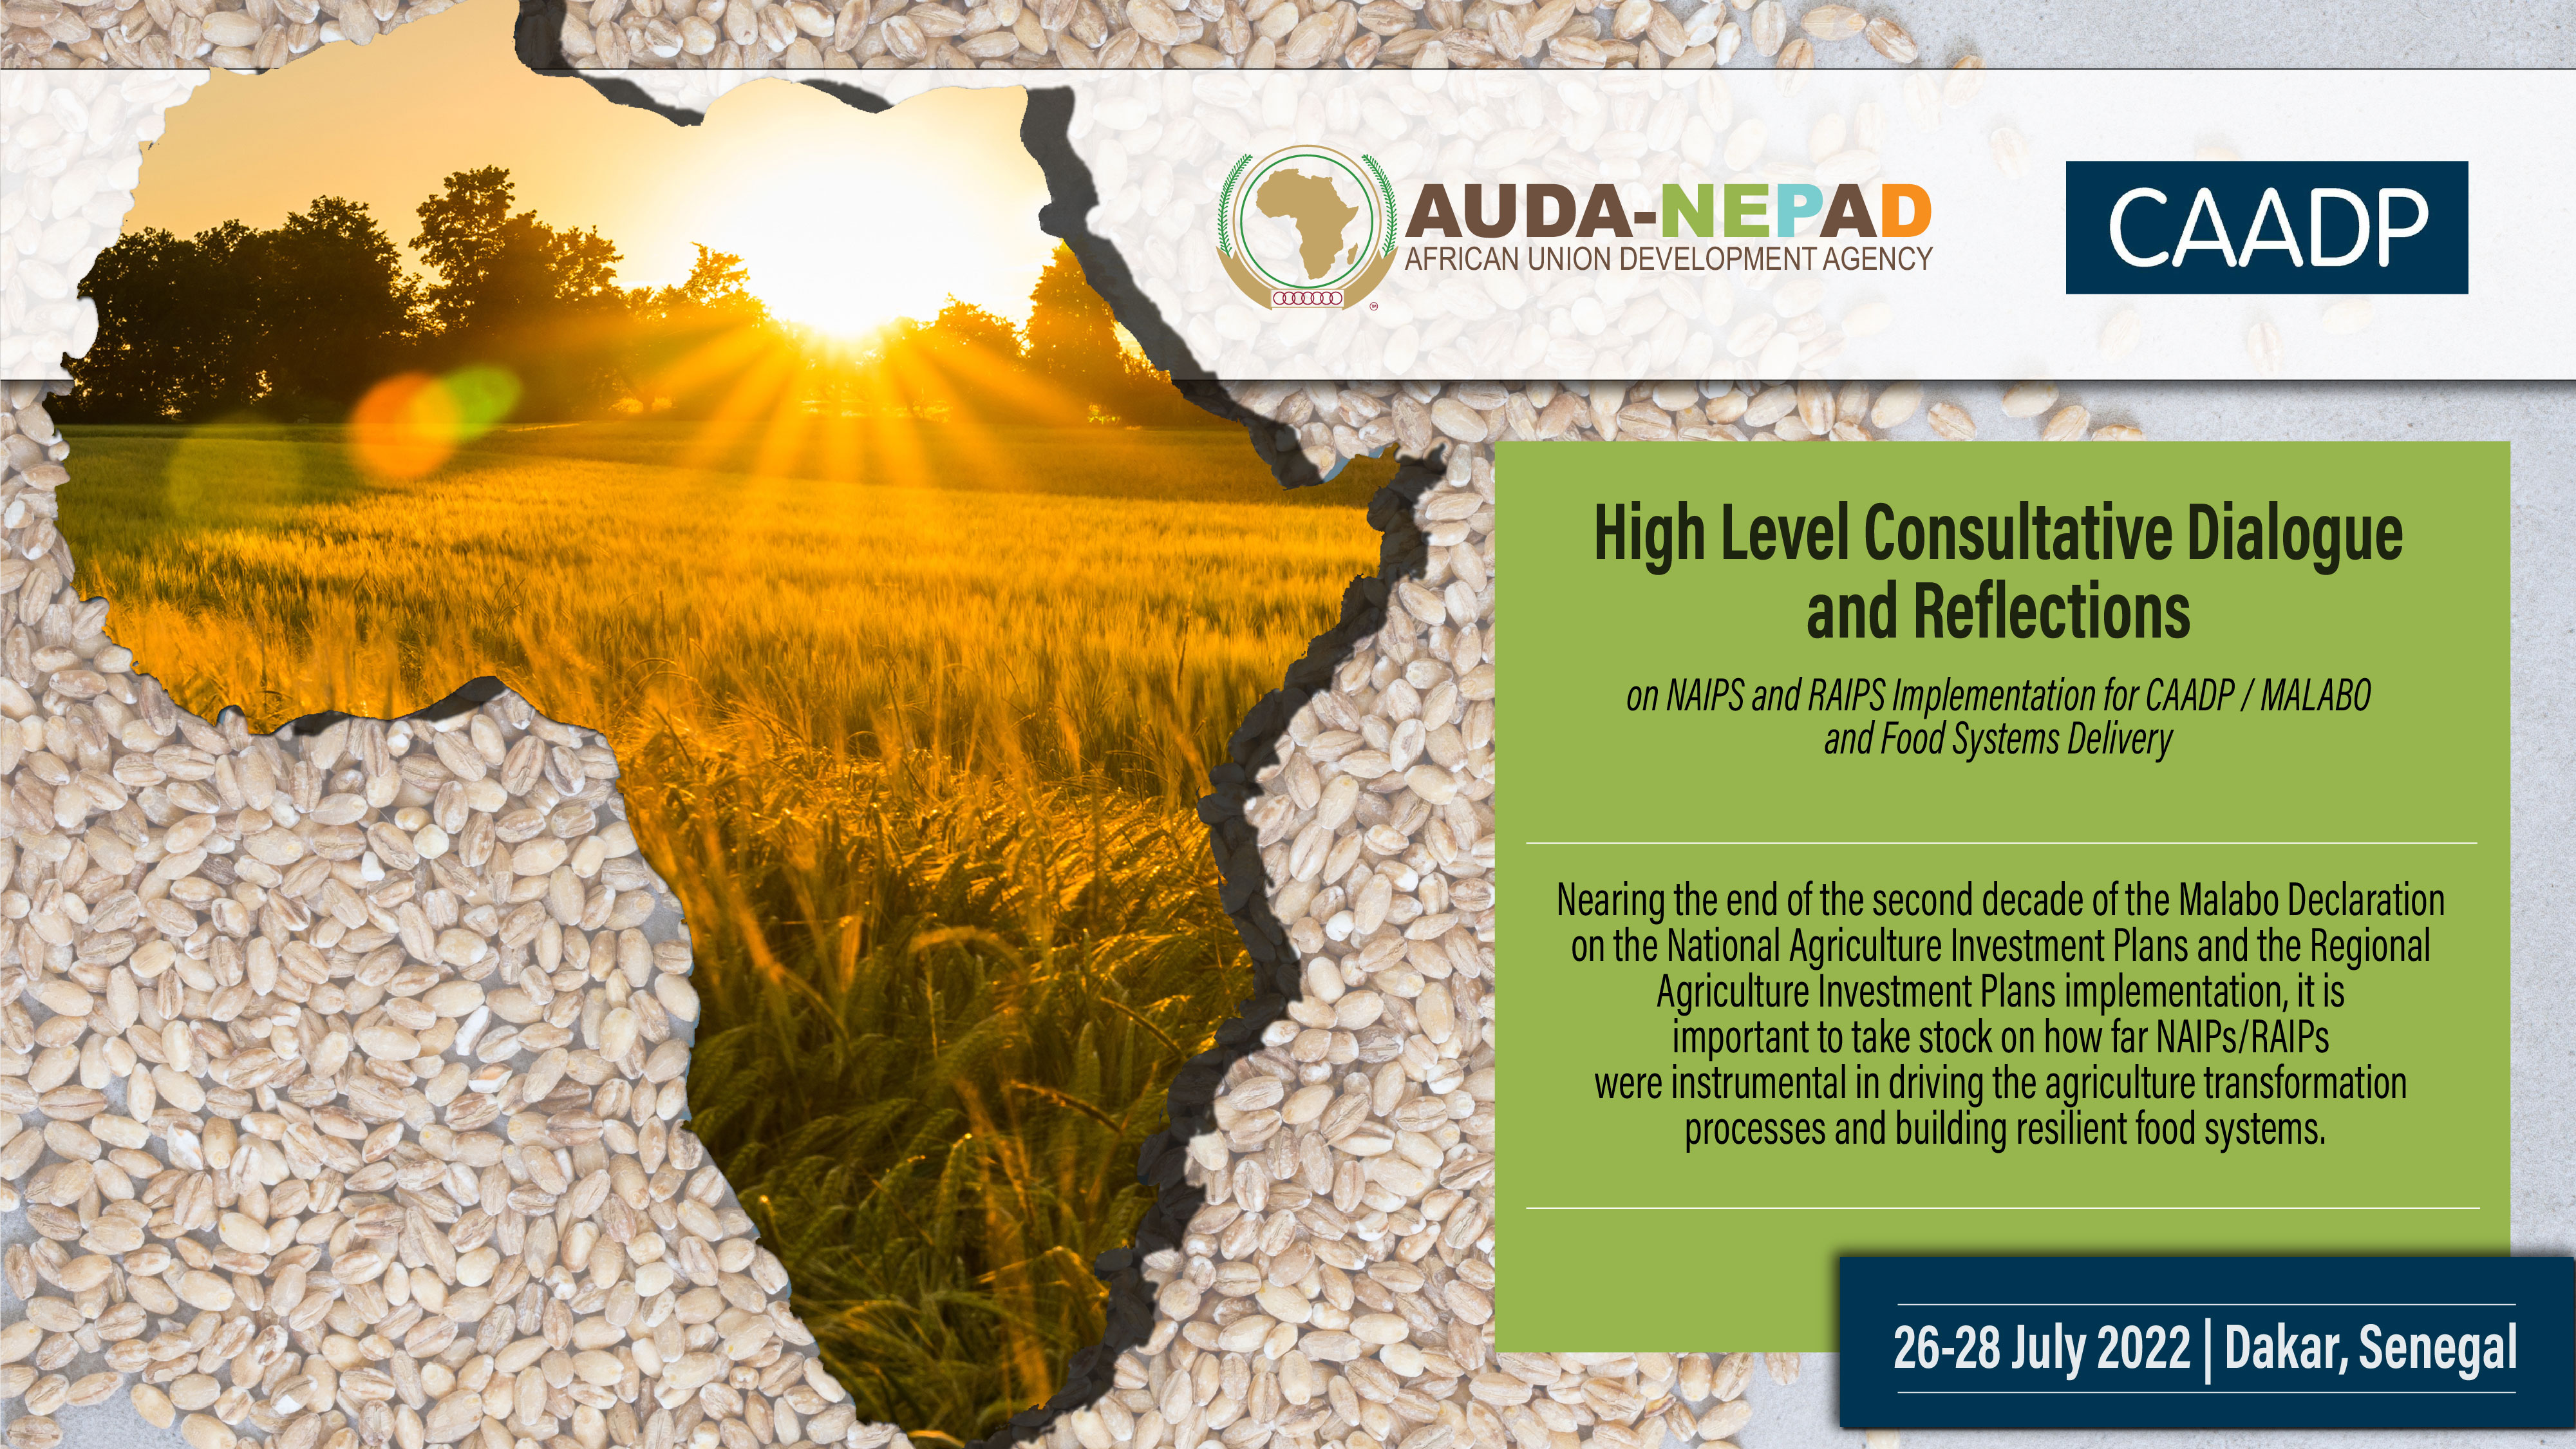 CAADP Key Messages 2